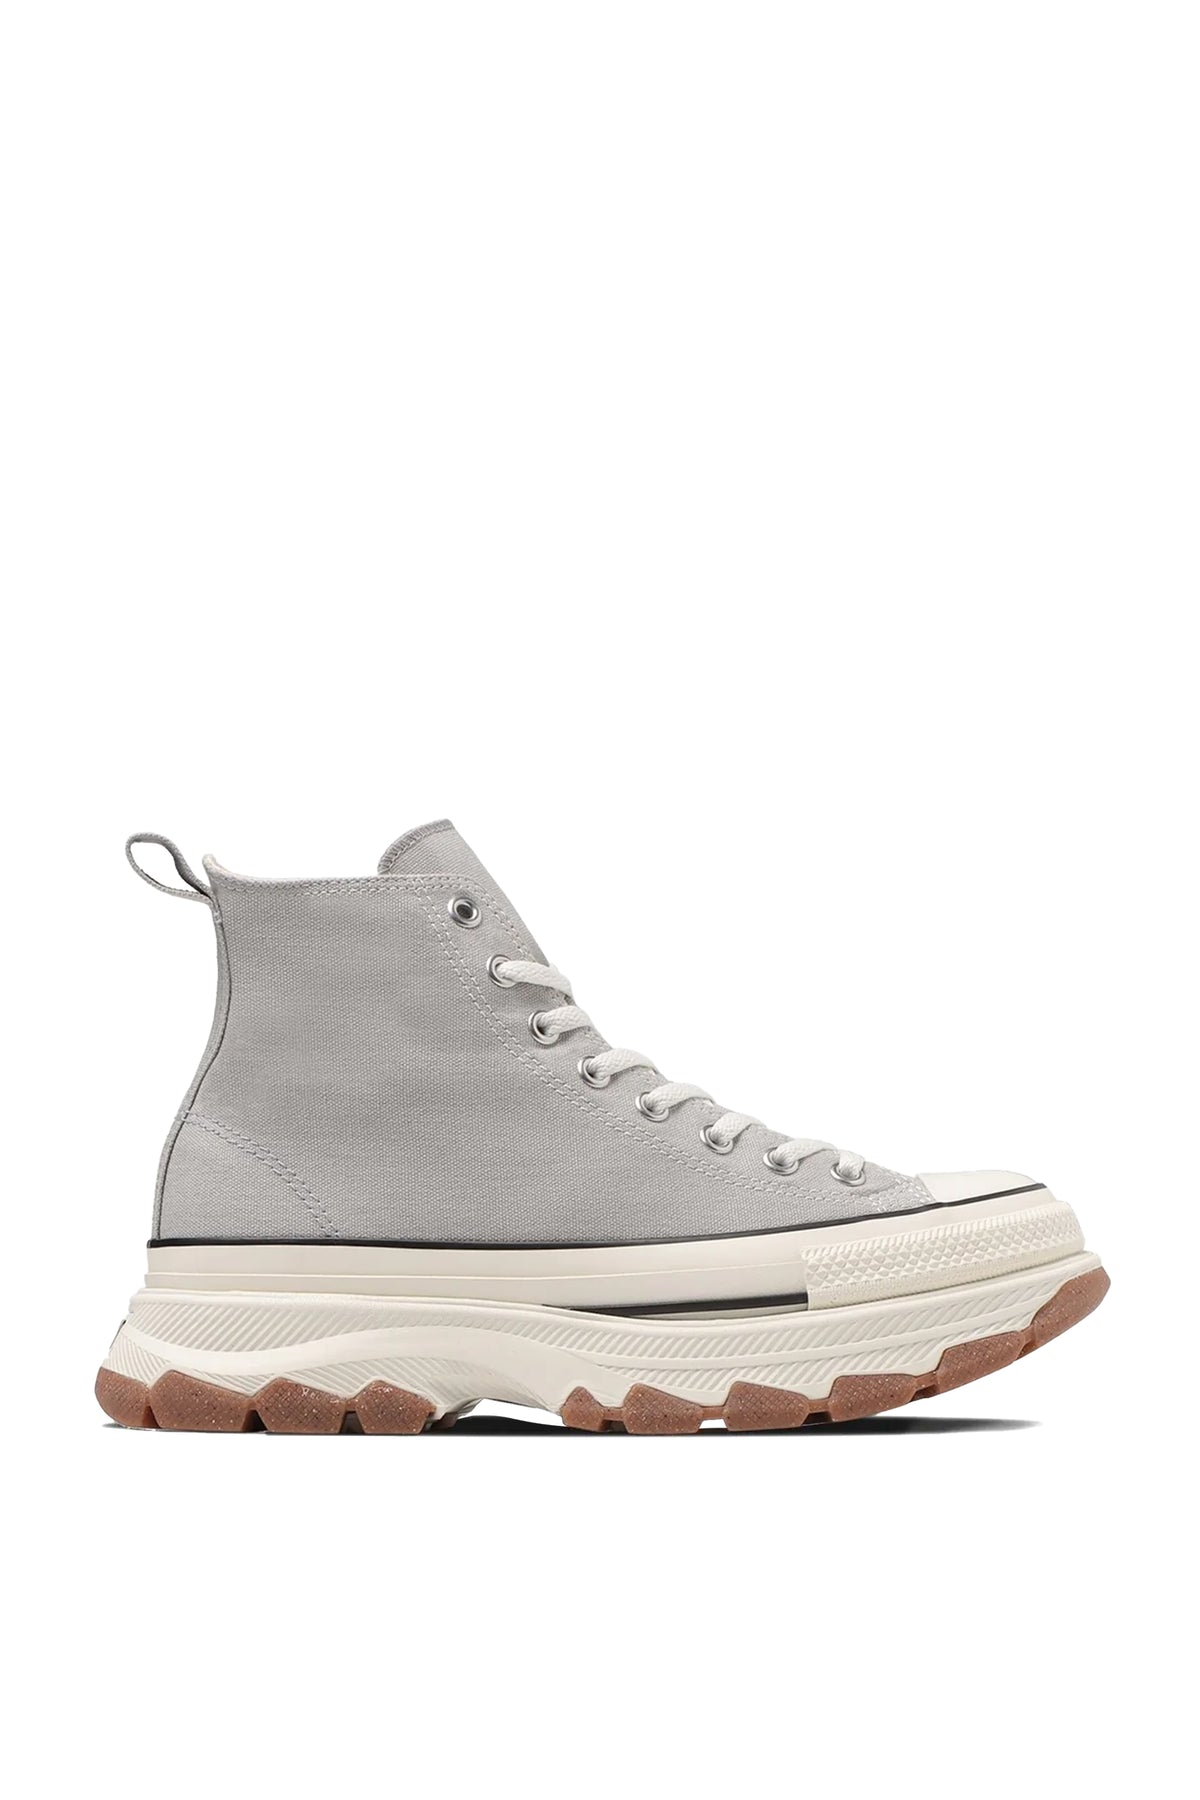 CONVERSE ALL STAR TREKWAVE HI / ICE GRY